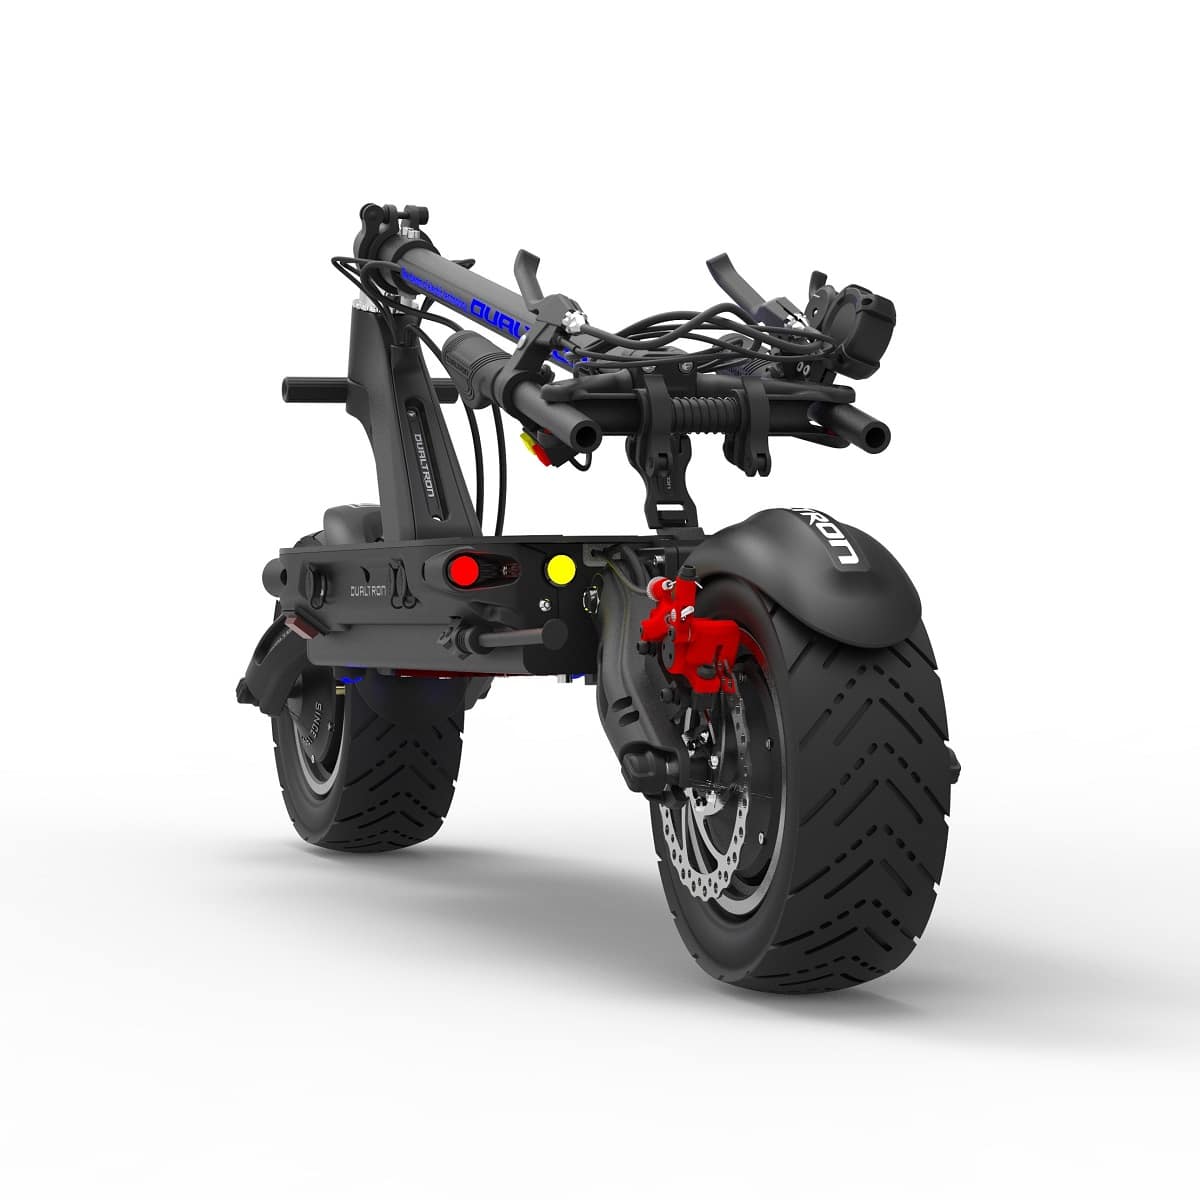 DUALTRON 5400 WATTS THUNDER , THE HOT ROD OF ELECTRIC SCOOTERS, WITH ABS BRAKES! ( PLEASE NOTE: THIS SCOOTER IS FOR OFF ROAD USE ONLY )